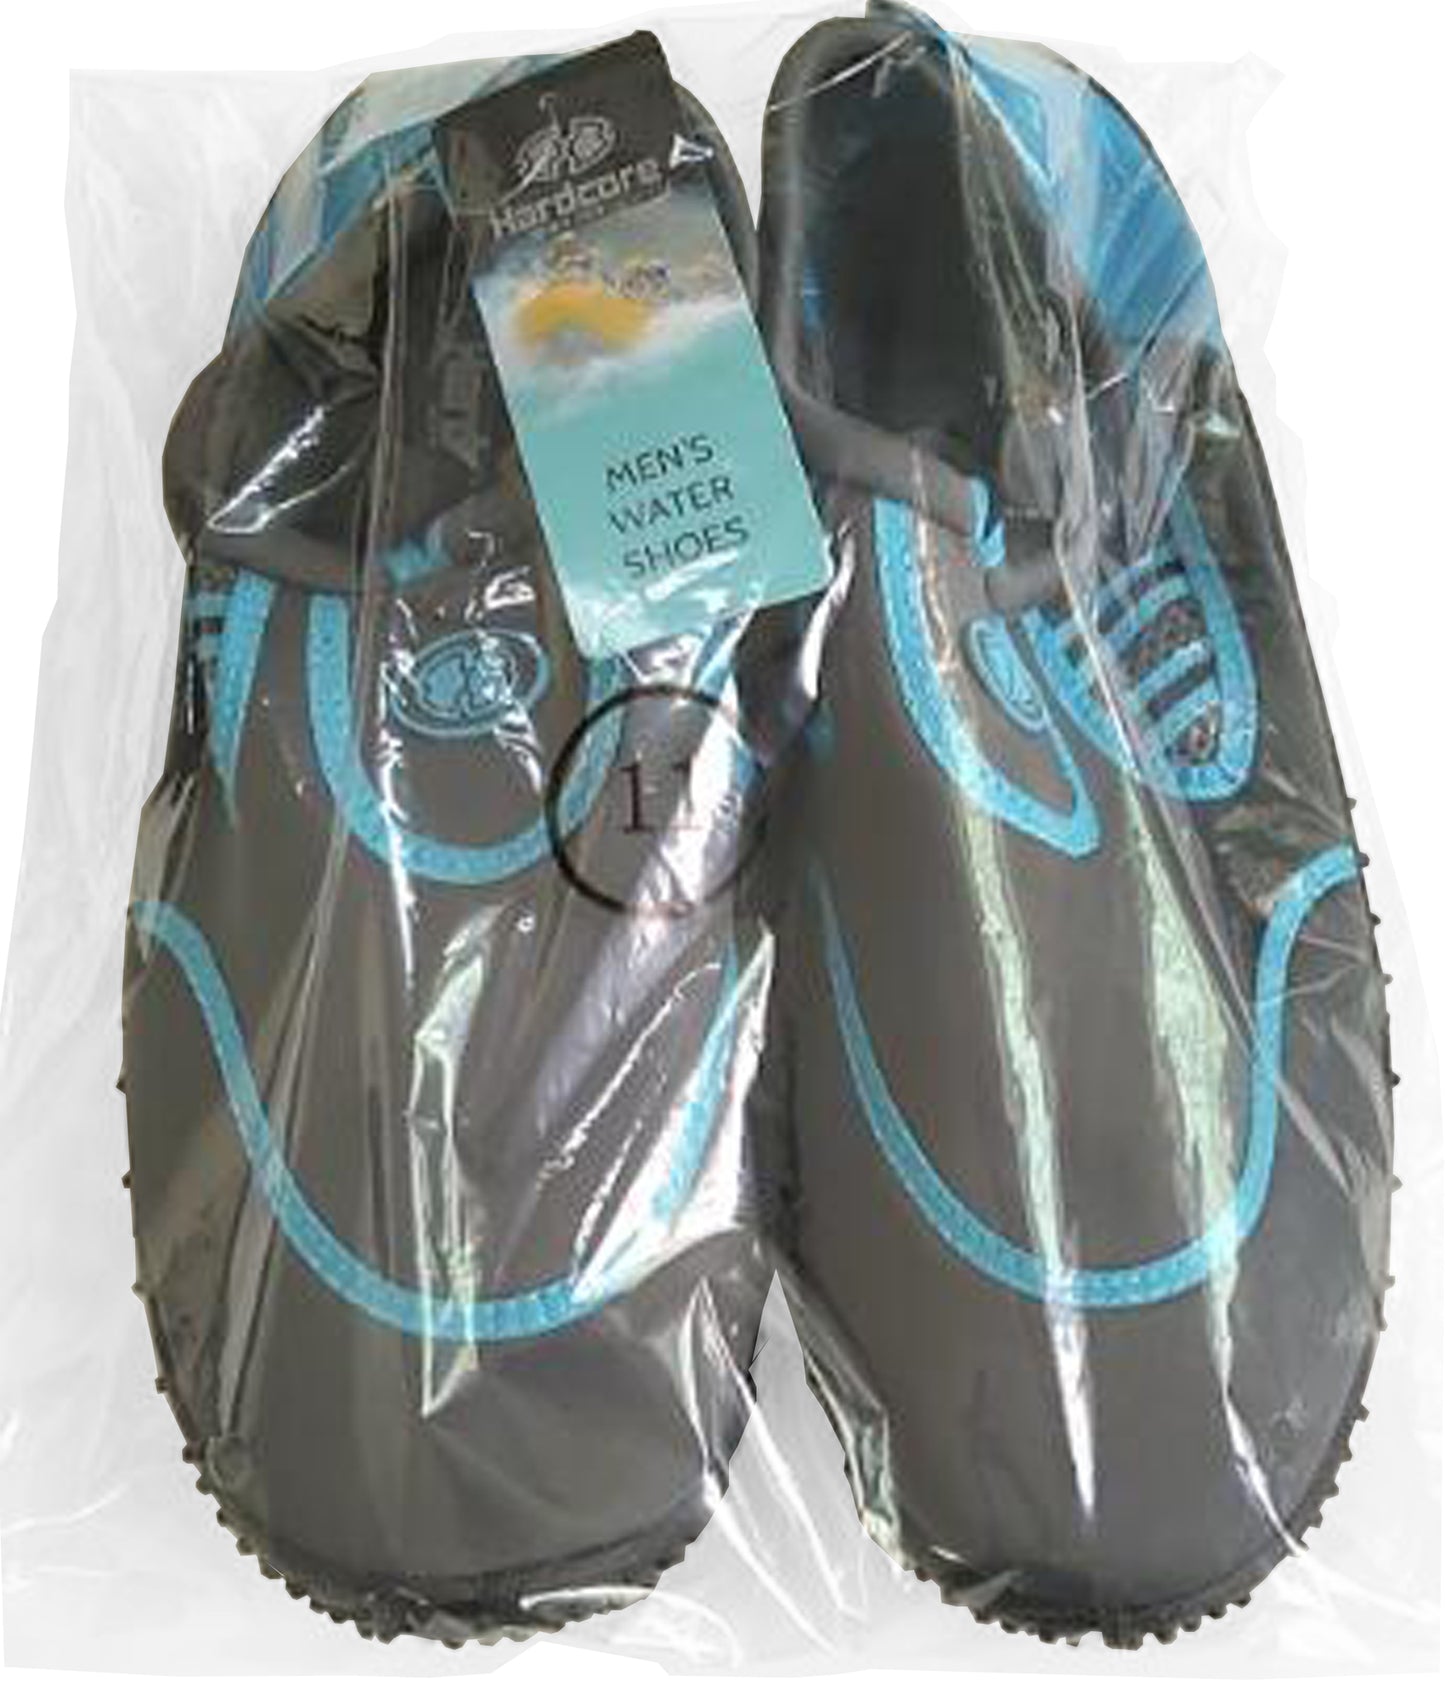 Hardcore mens water shoes; Quick drying aqua socks for barefoot running, swimming, poolside fun  at the water park, camping, yoga or surfing at the beach